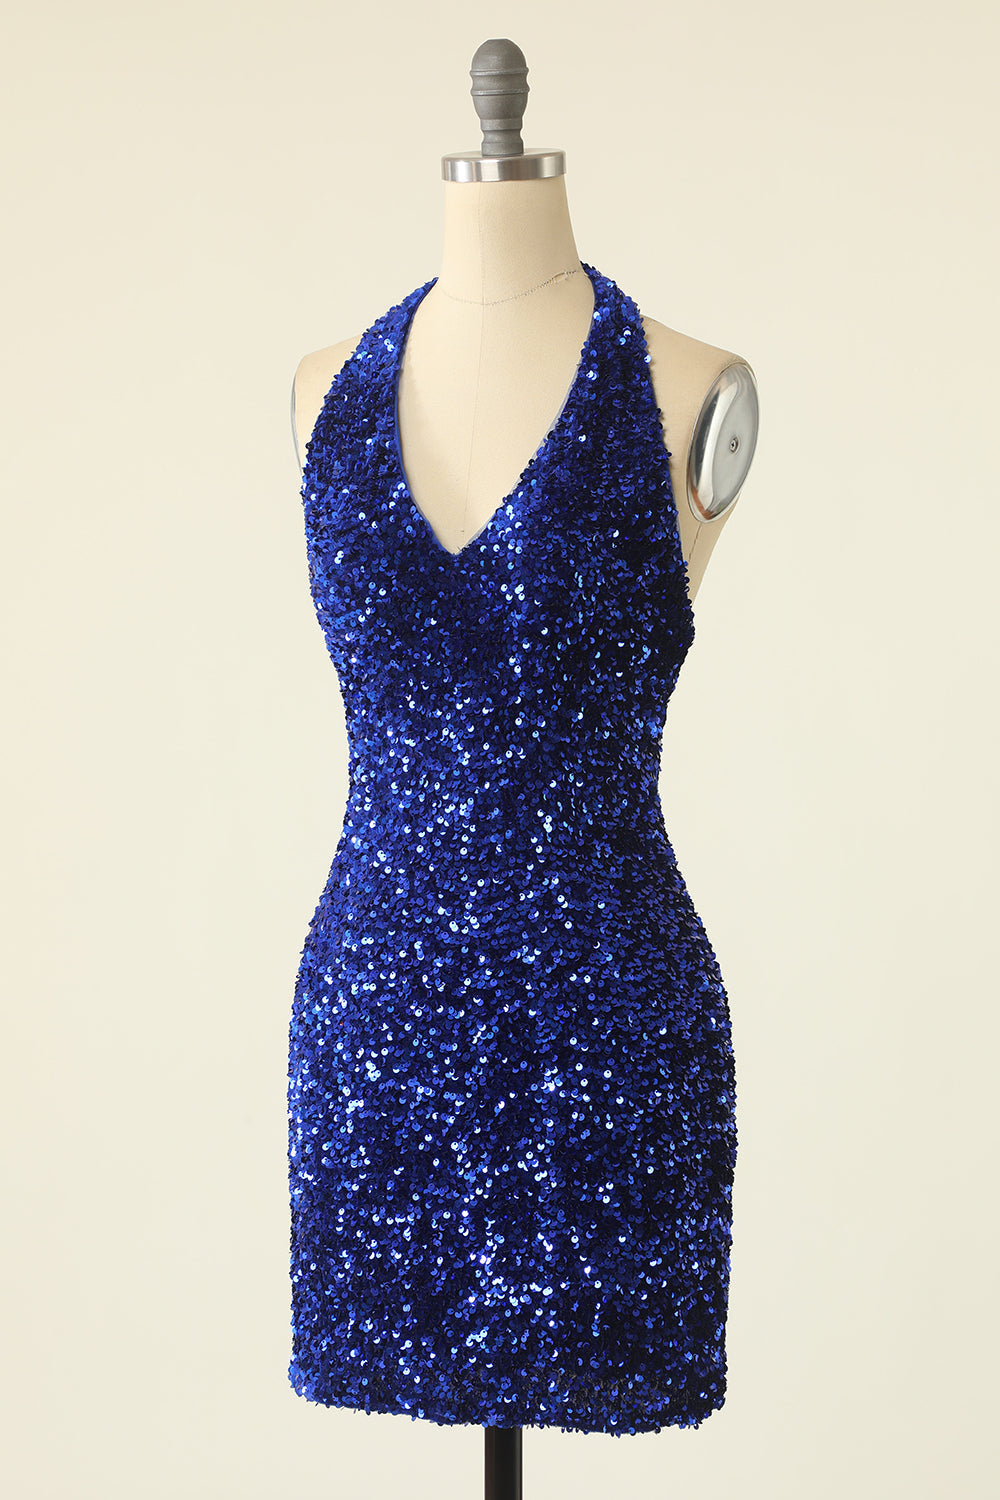 Party Dresses In Store, Royal Blue Sequined Halter Neck Cocktail Dress